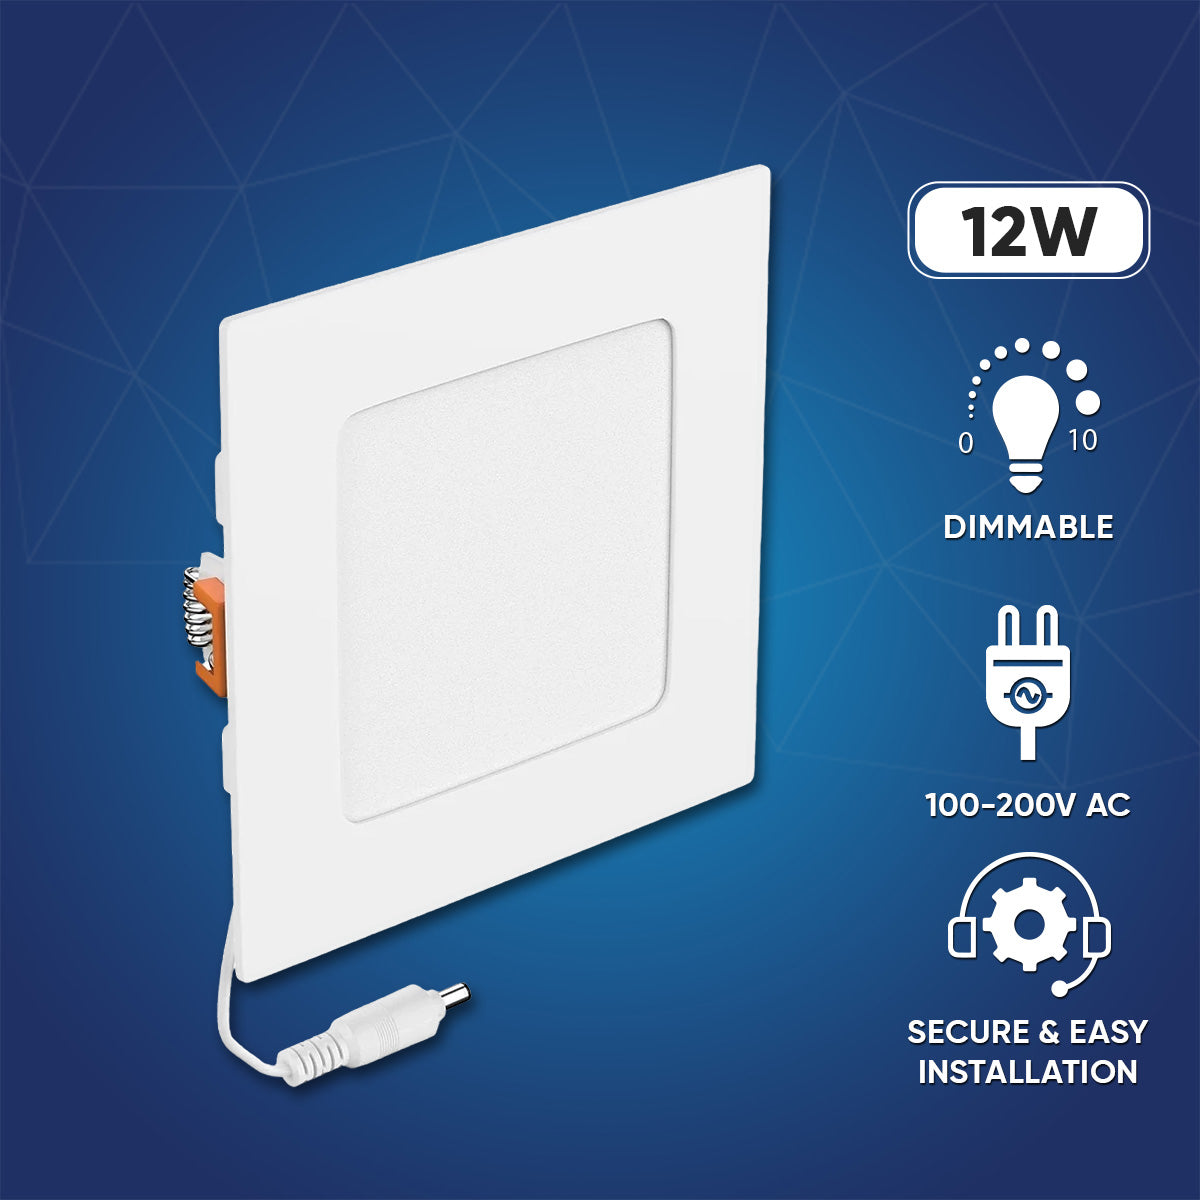 LED Slim Panel Recessed Ceiling Light- Features